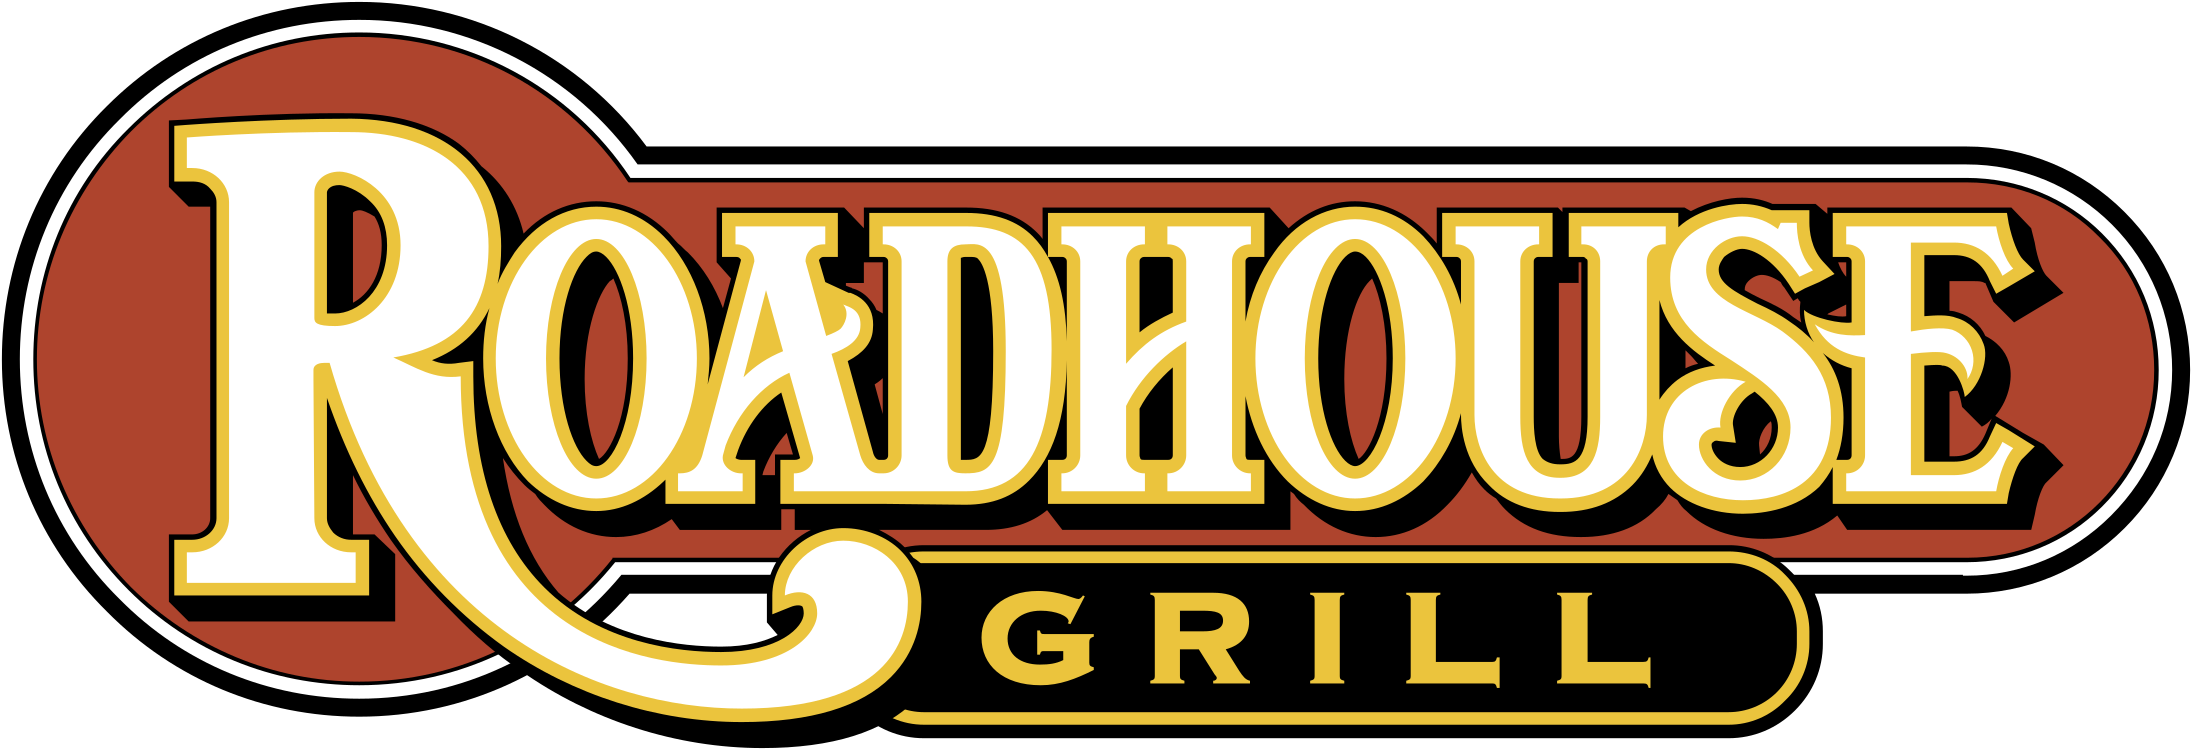 Roadhouse Grill Logo Png Transparent Svg Vector Freebie - 9.5 Oz. Smooth Wall Tumbler (clear) Quantity(100) (2400x2400)